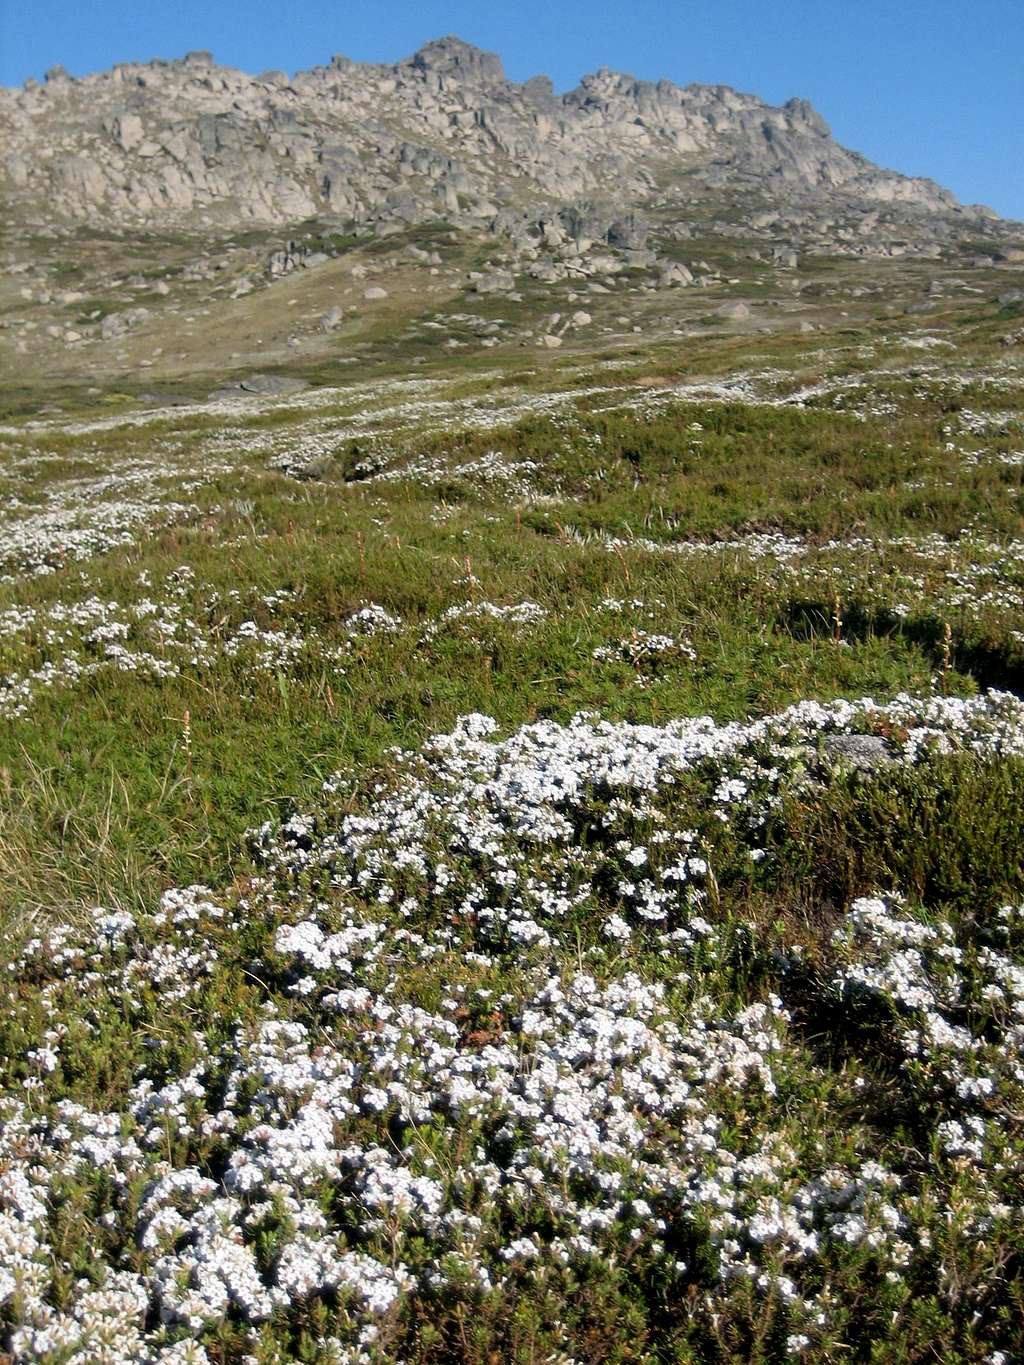 Wildflowers and Granite outcrops